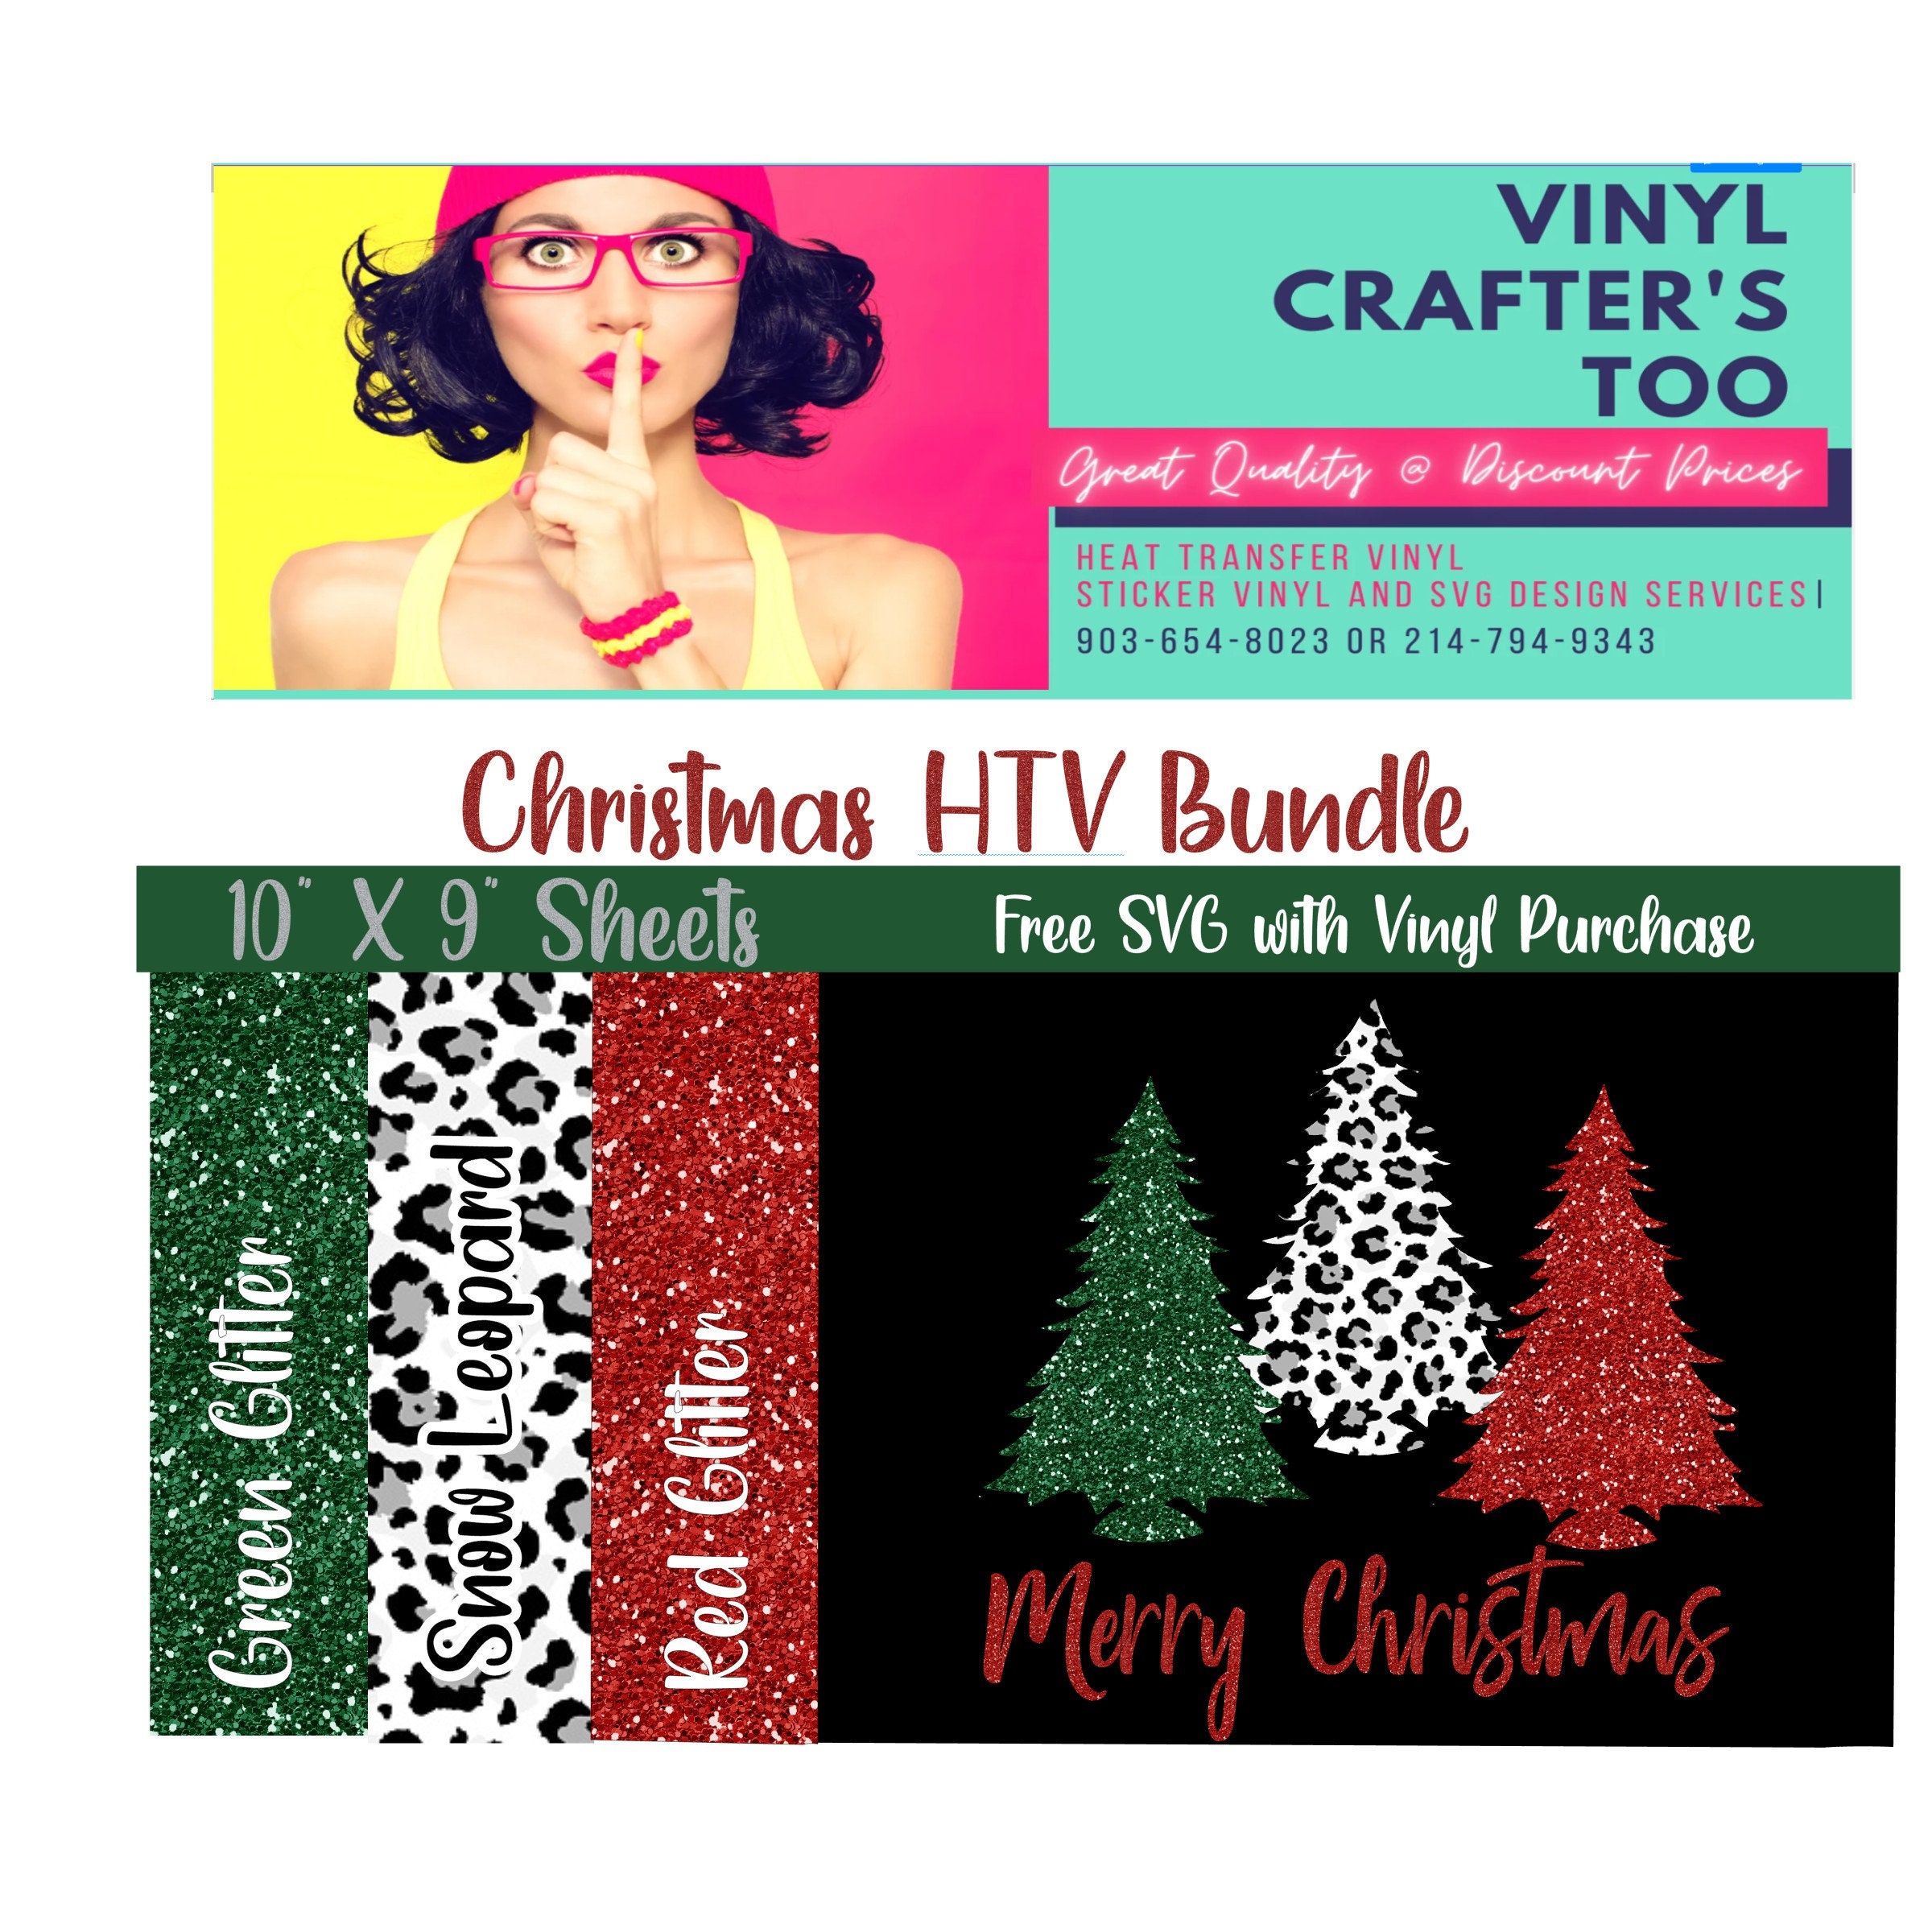  Heat Transfer Vinyl HTV Bundle: 20 Pack Assorted Colors 12x10  Sheets for DIY Iron On T-Shirts Fabrics - Seamless Integration with Cricut,  Silhouette Cameo, Heat Press Machines